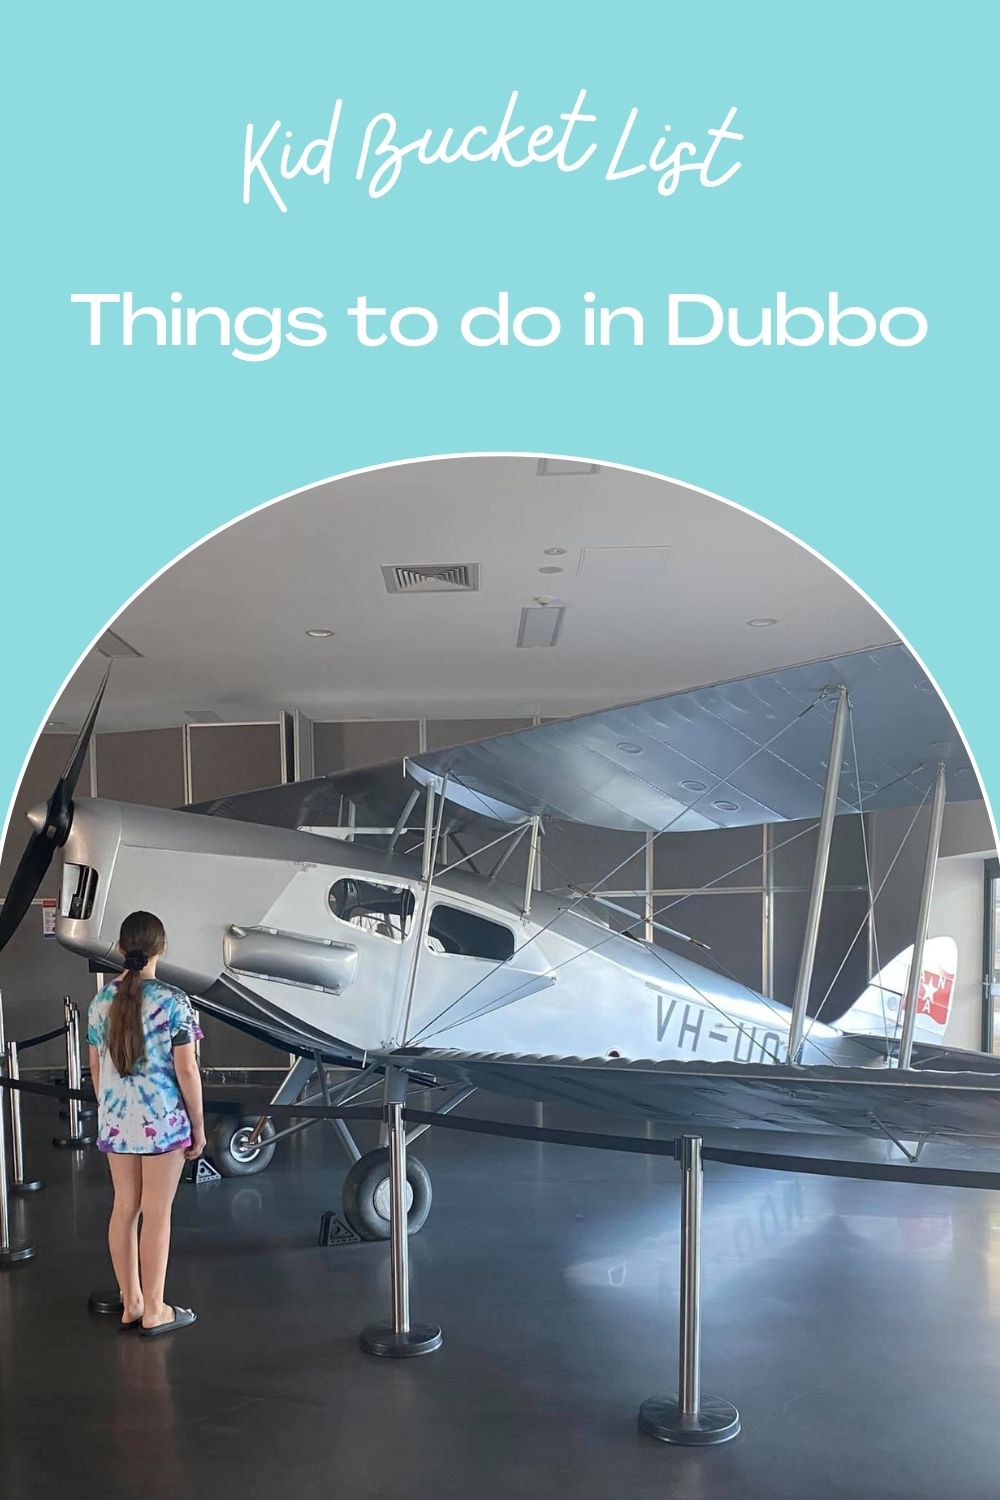 Dubbo with kids | The best things to do in Dubbo with your family